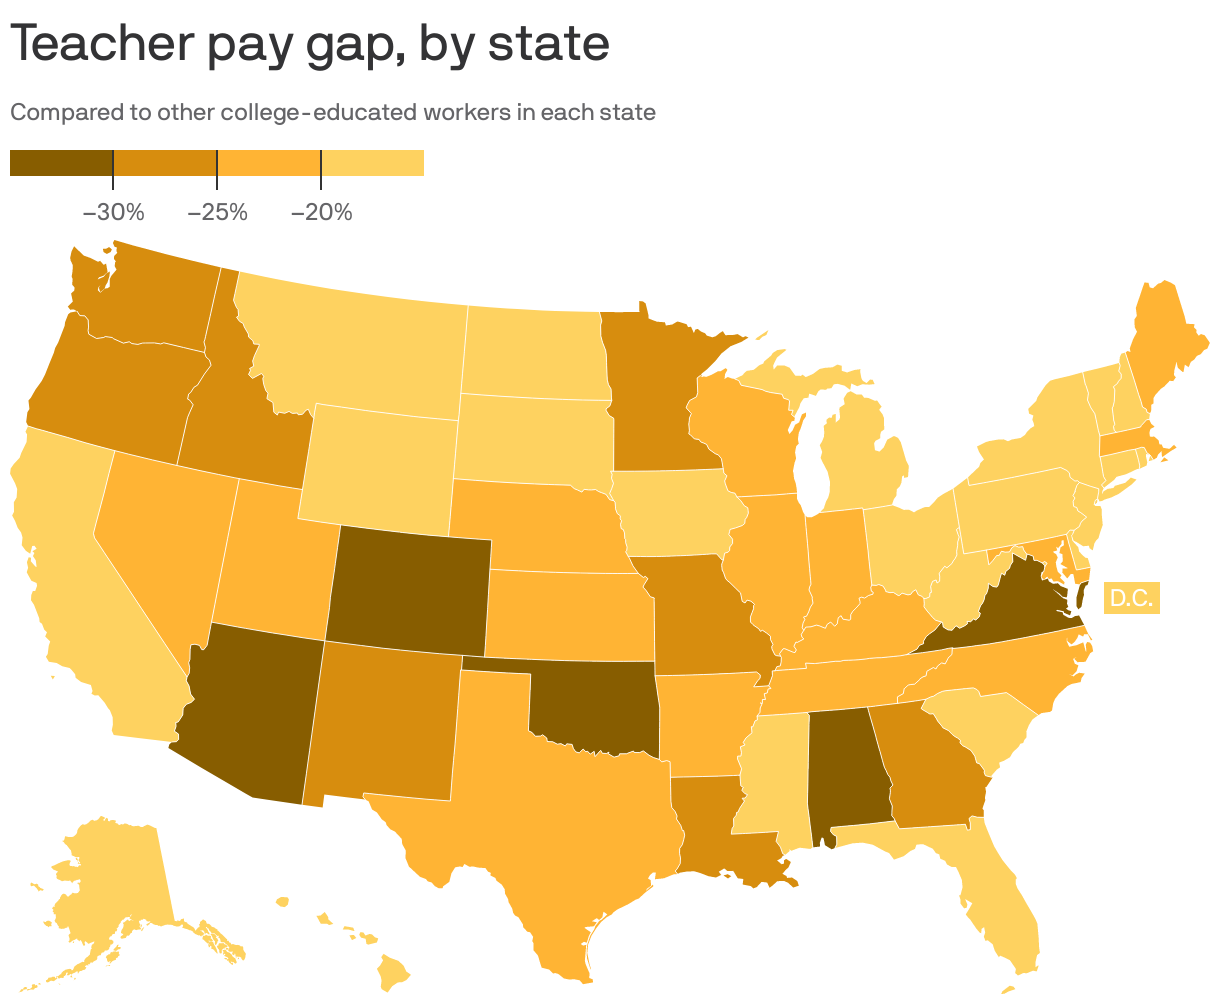 Teacher pay gap, by state